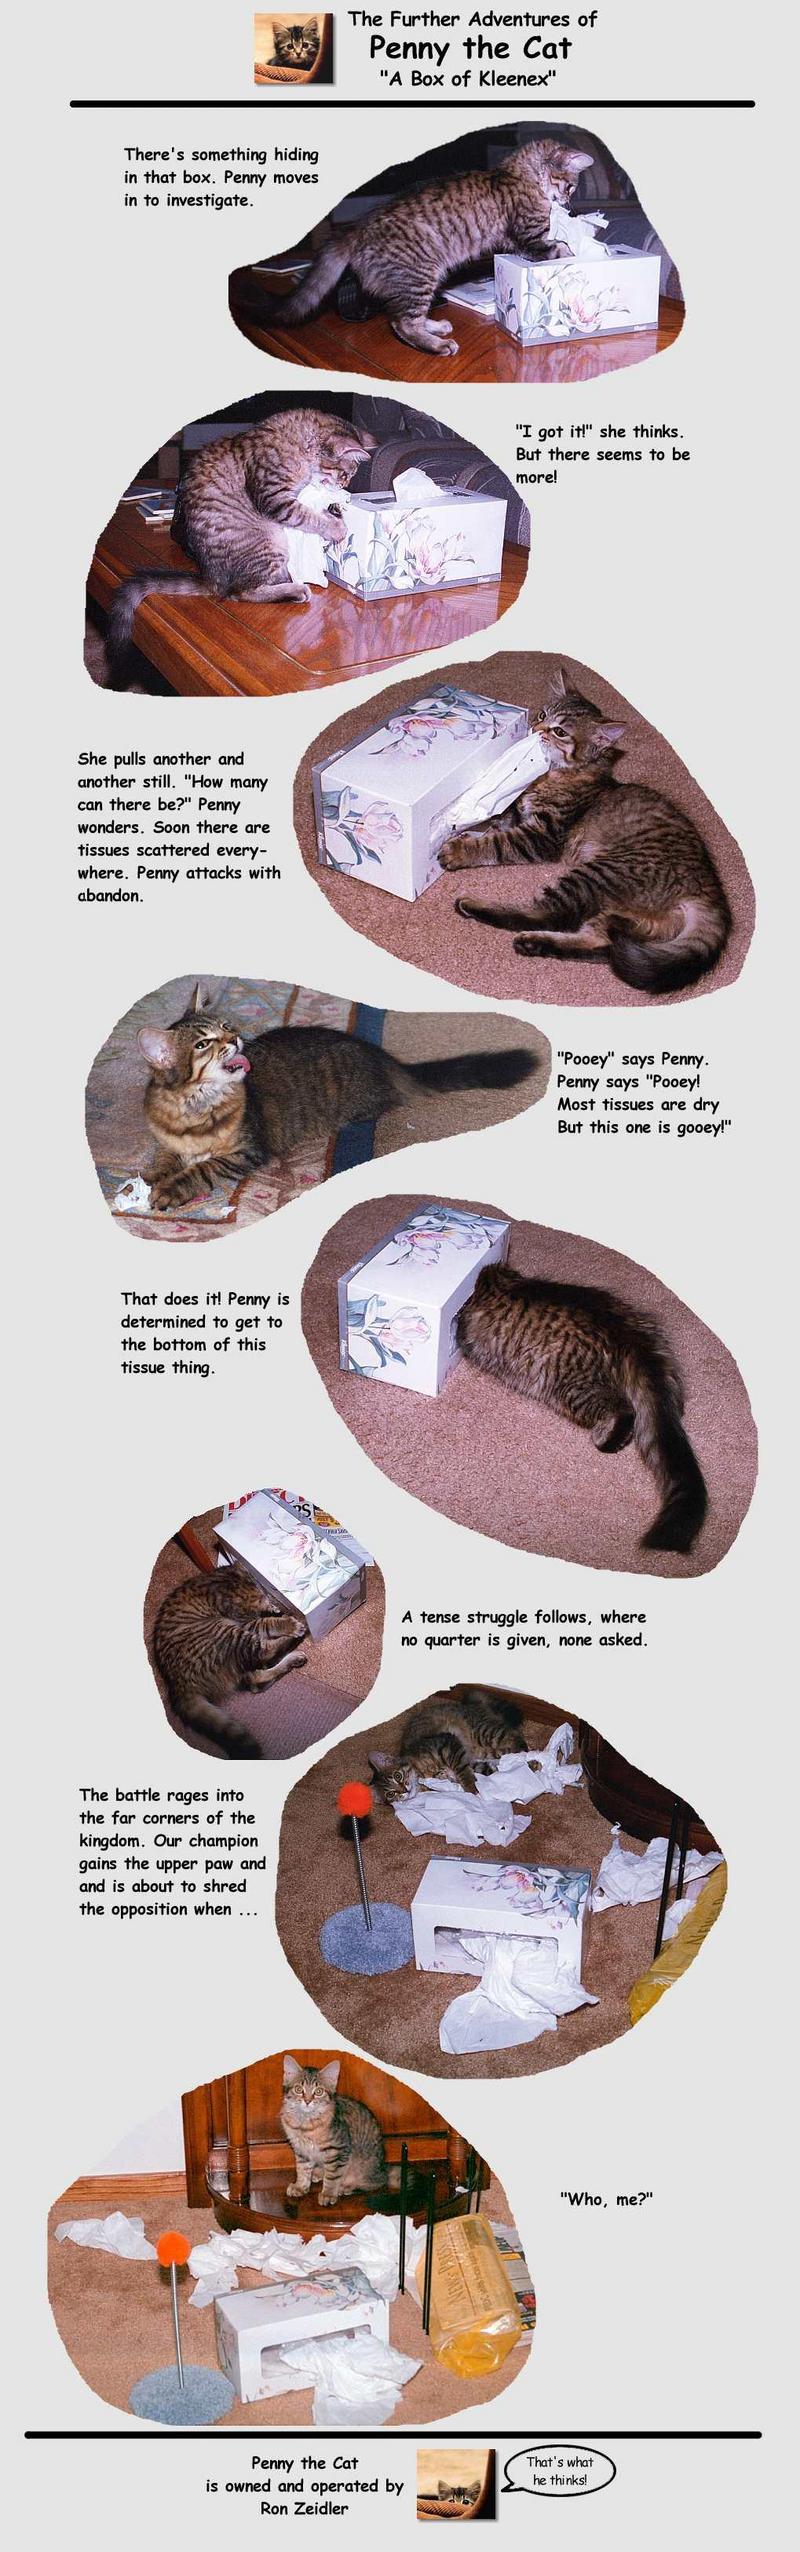 The Further Adventures of Penny the Cat; DISPLAY FULL IMAGE.